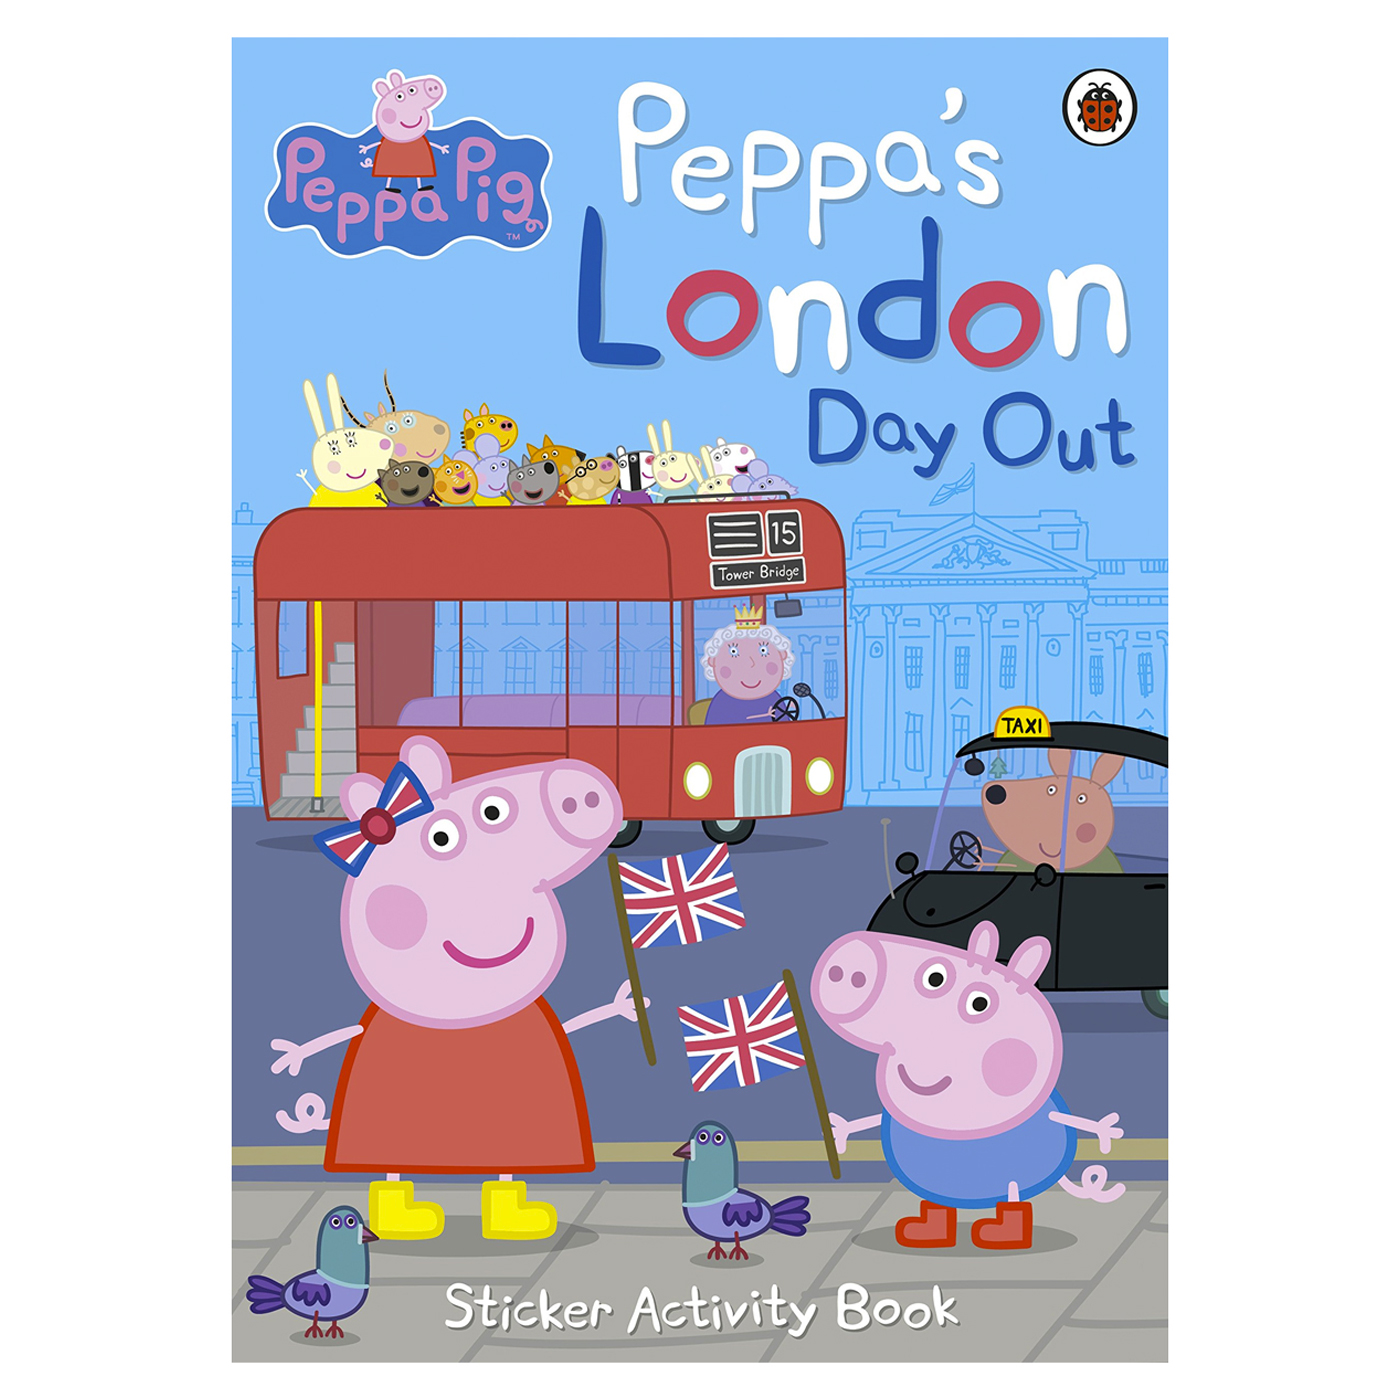 LADYBIRD Peppa Pig: Peppa's London Day Out